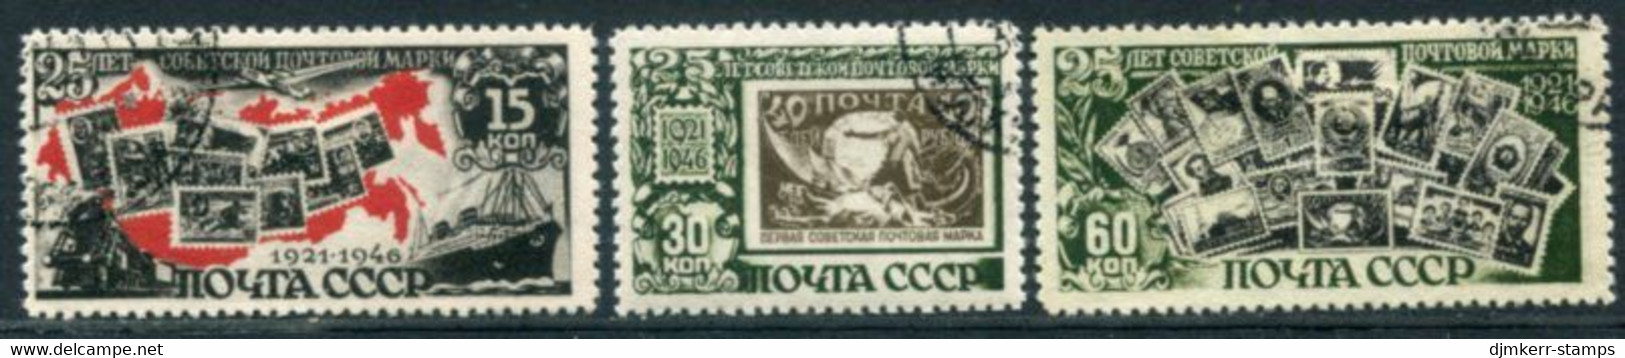 SOVIET UNION 1946 Stamp Anniversary Used  Michel 1071-73 - Used Stamps